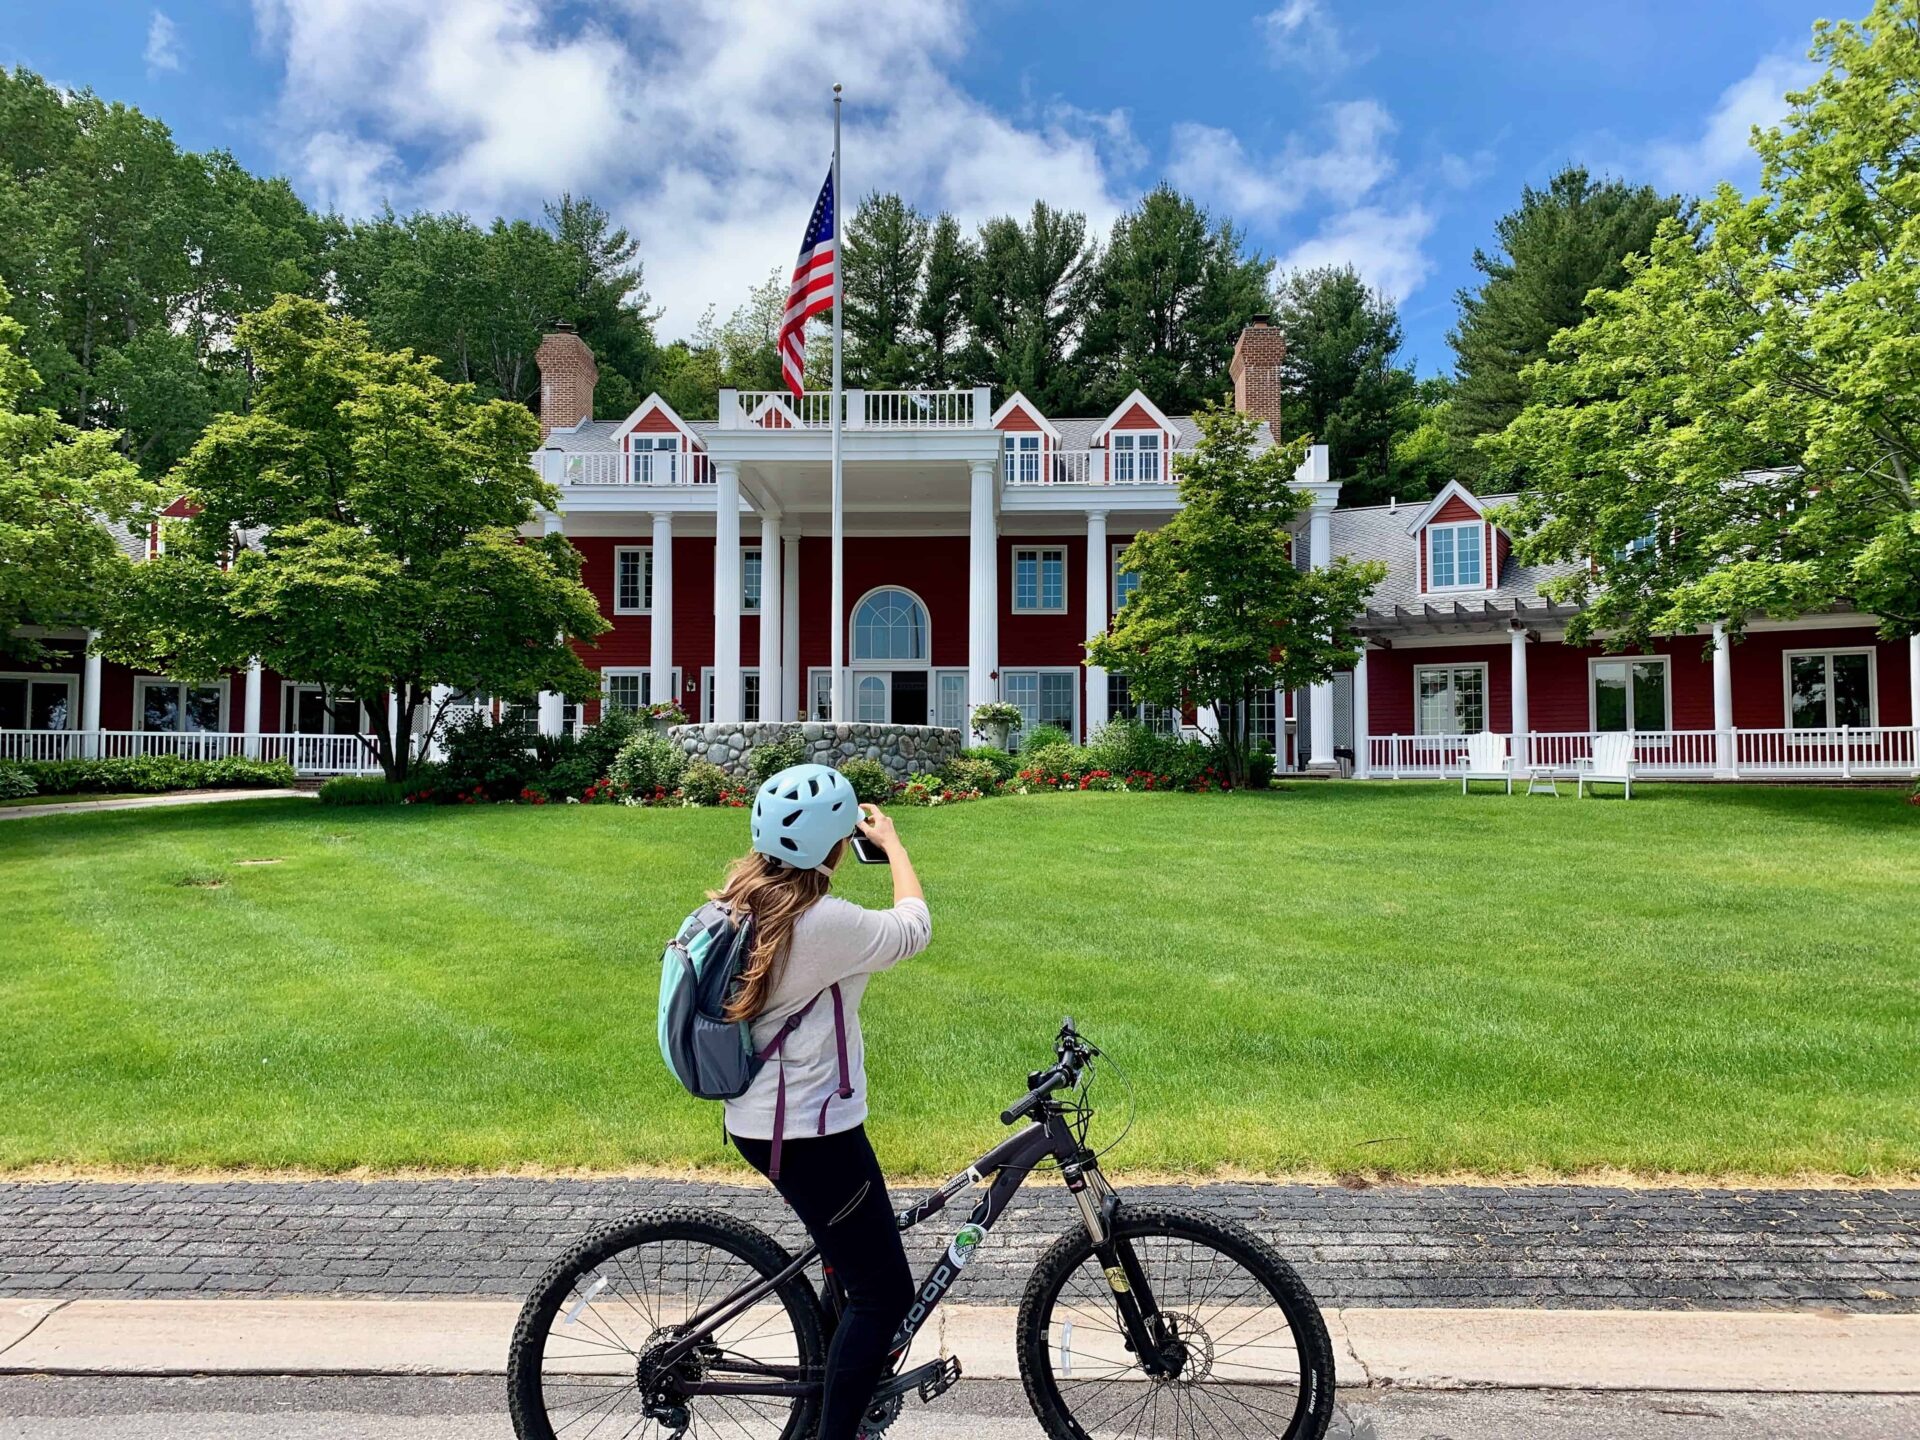 Cindy taking a picture while on her bike of the Inn at Black Star Farms in Suttons Bay, Michigan